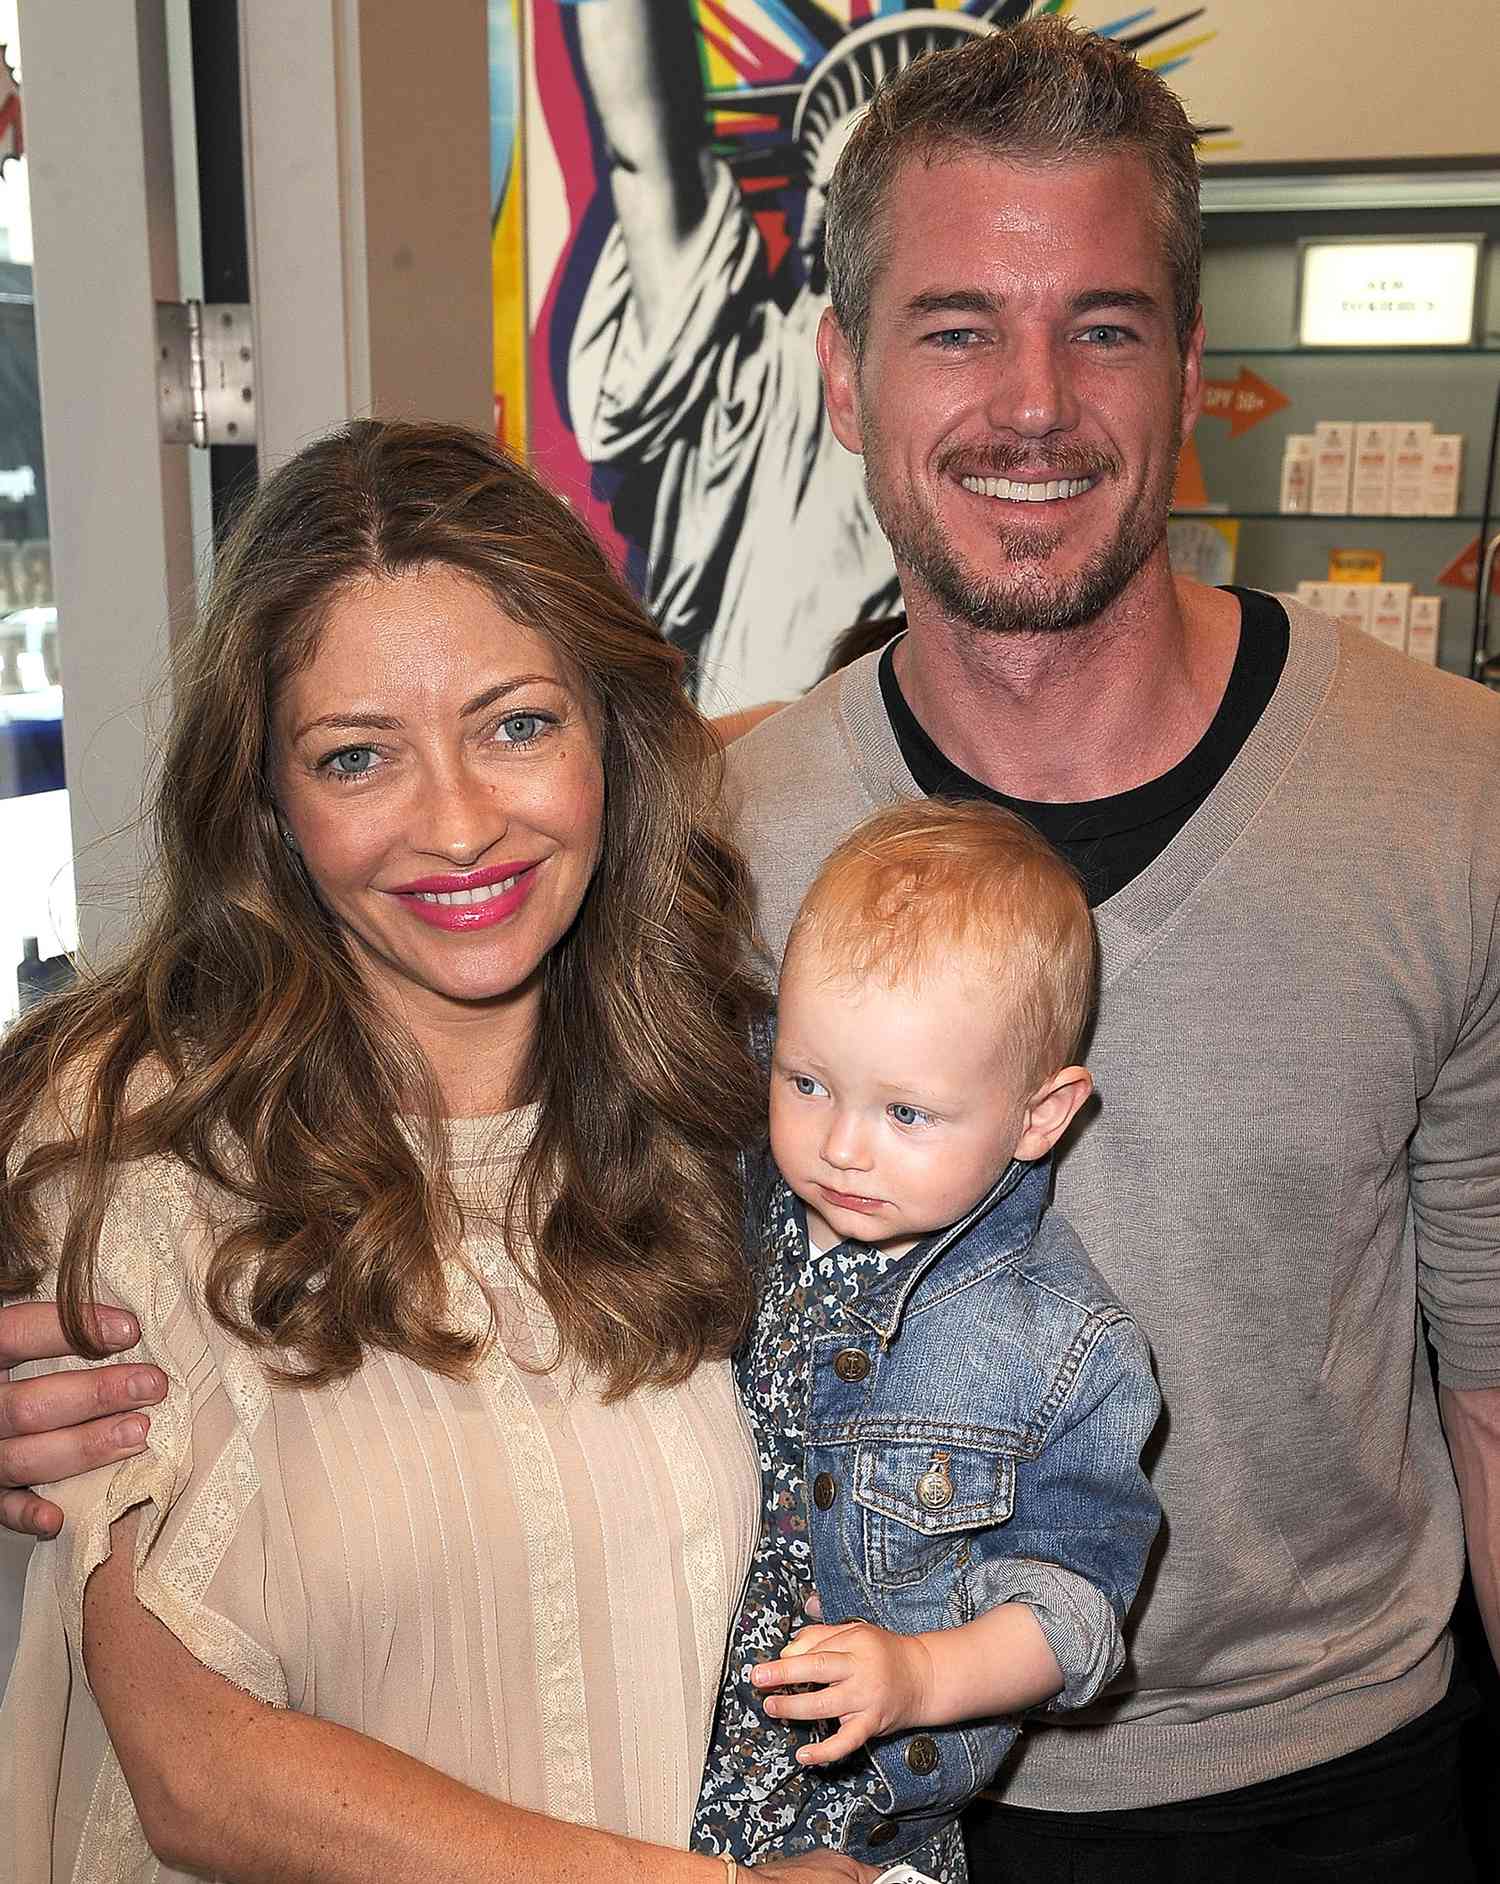 abby boothby recommends eric dane and rebecca gayheart sextape pic